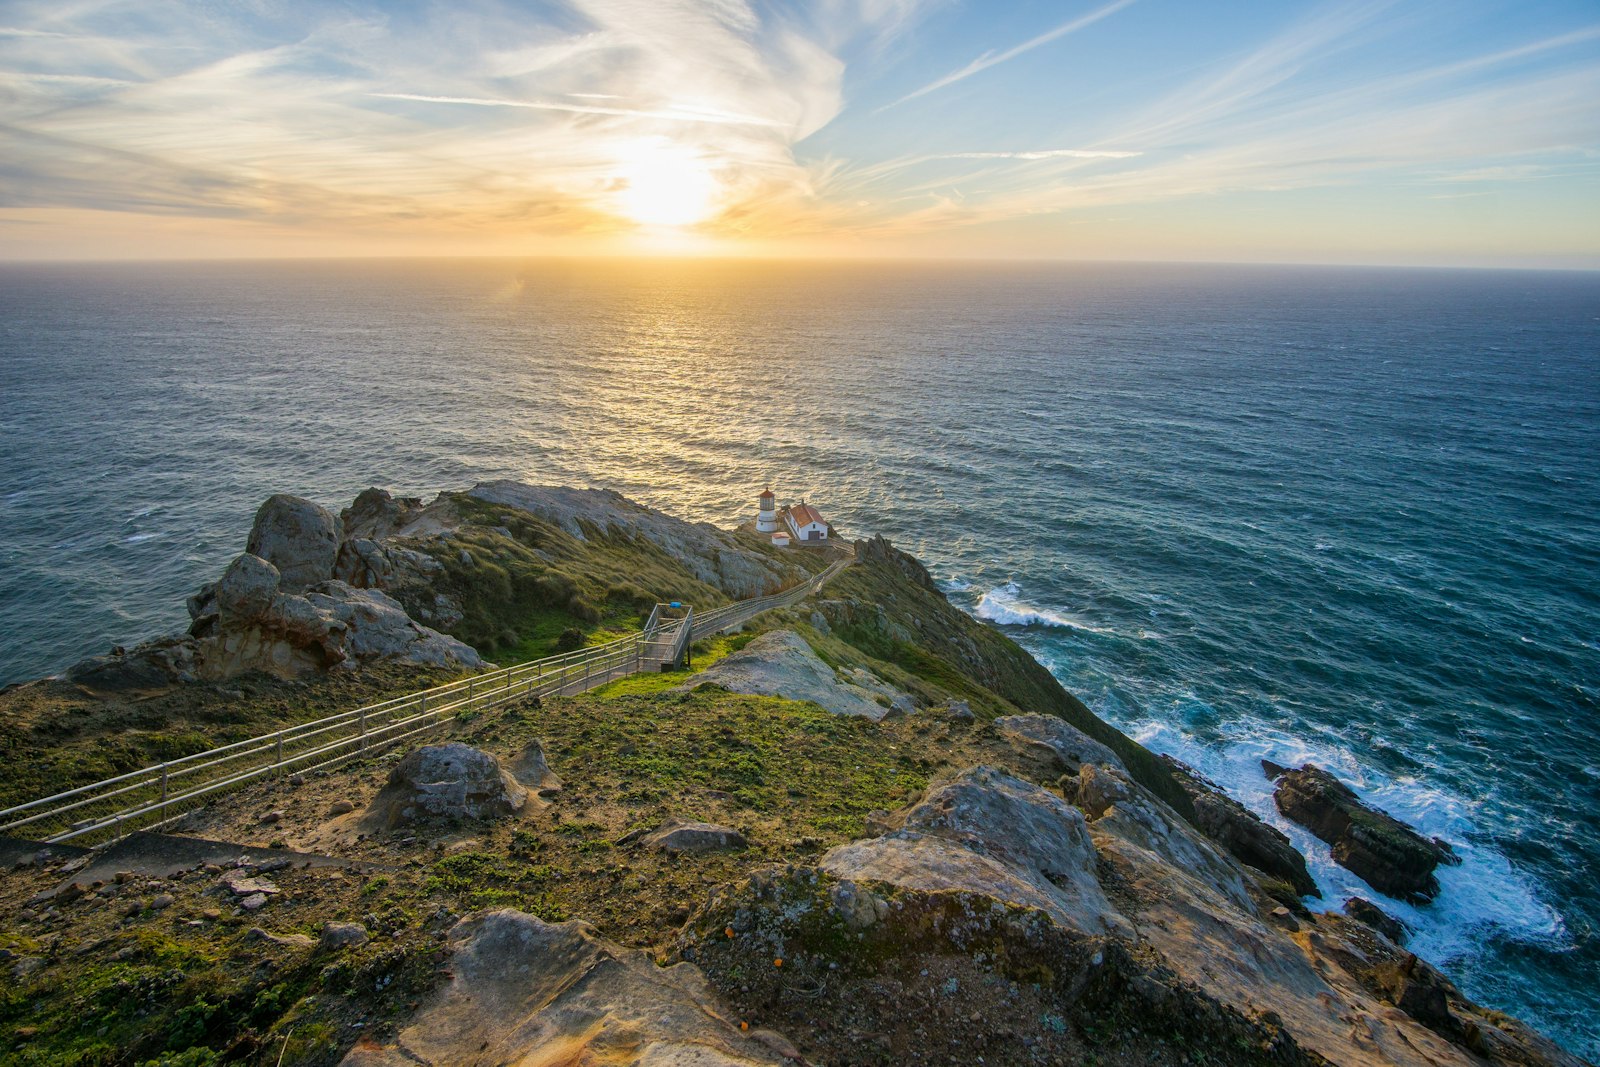 Four white-sided, red-roofed structures sit on a rocky headland above the Pacific Ocean at the base of a long stairway. Above and to the left of the lighthouse, the sun filters through wispy clouds as it descends toward the horizon.